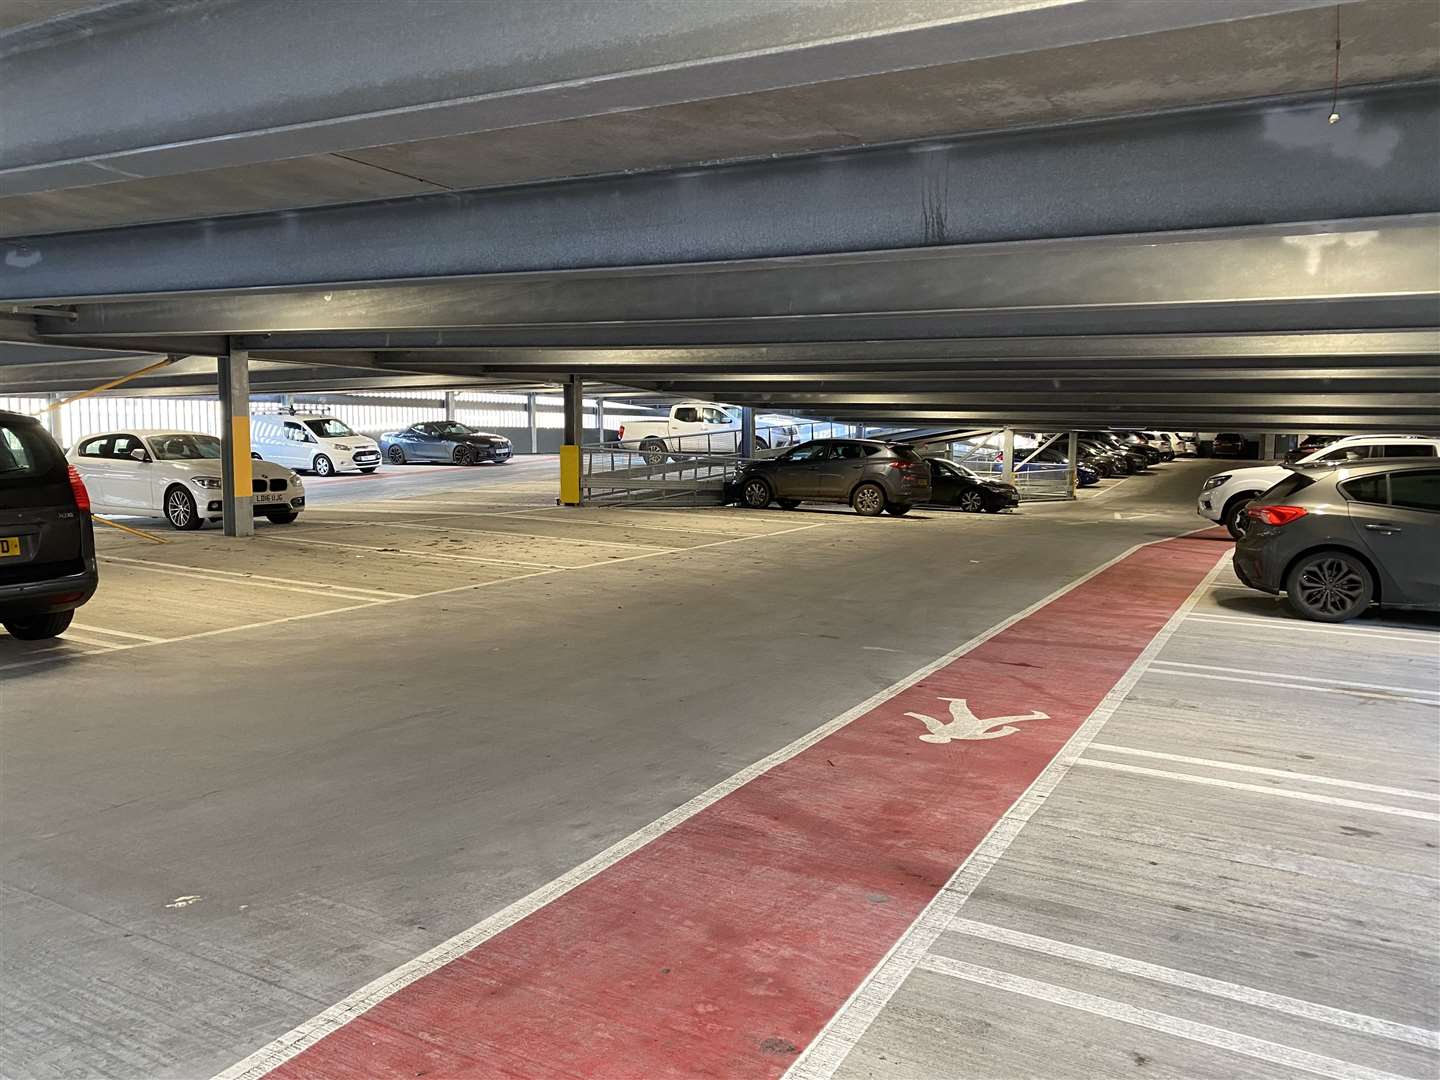 Figures obtained by KentOnline reveal the multi-storey is Canterbury's emptiest car park